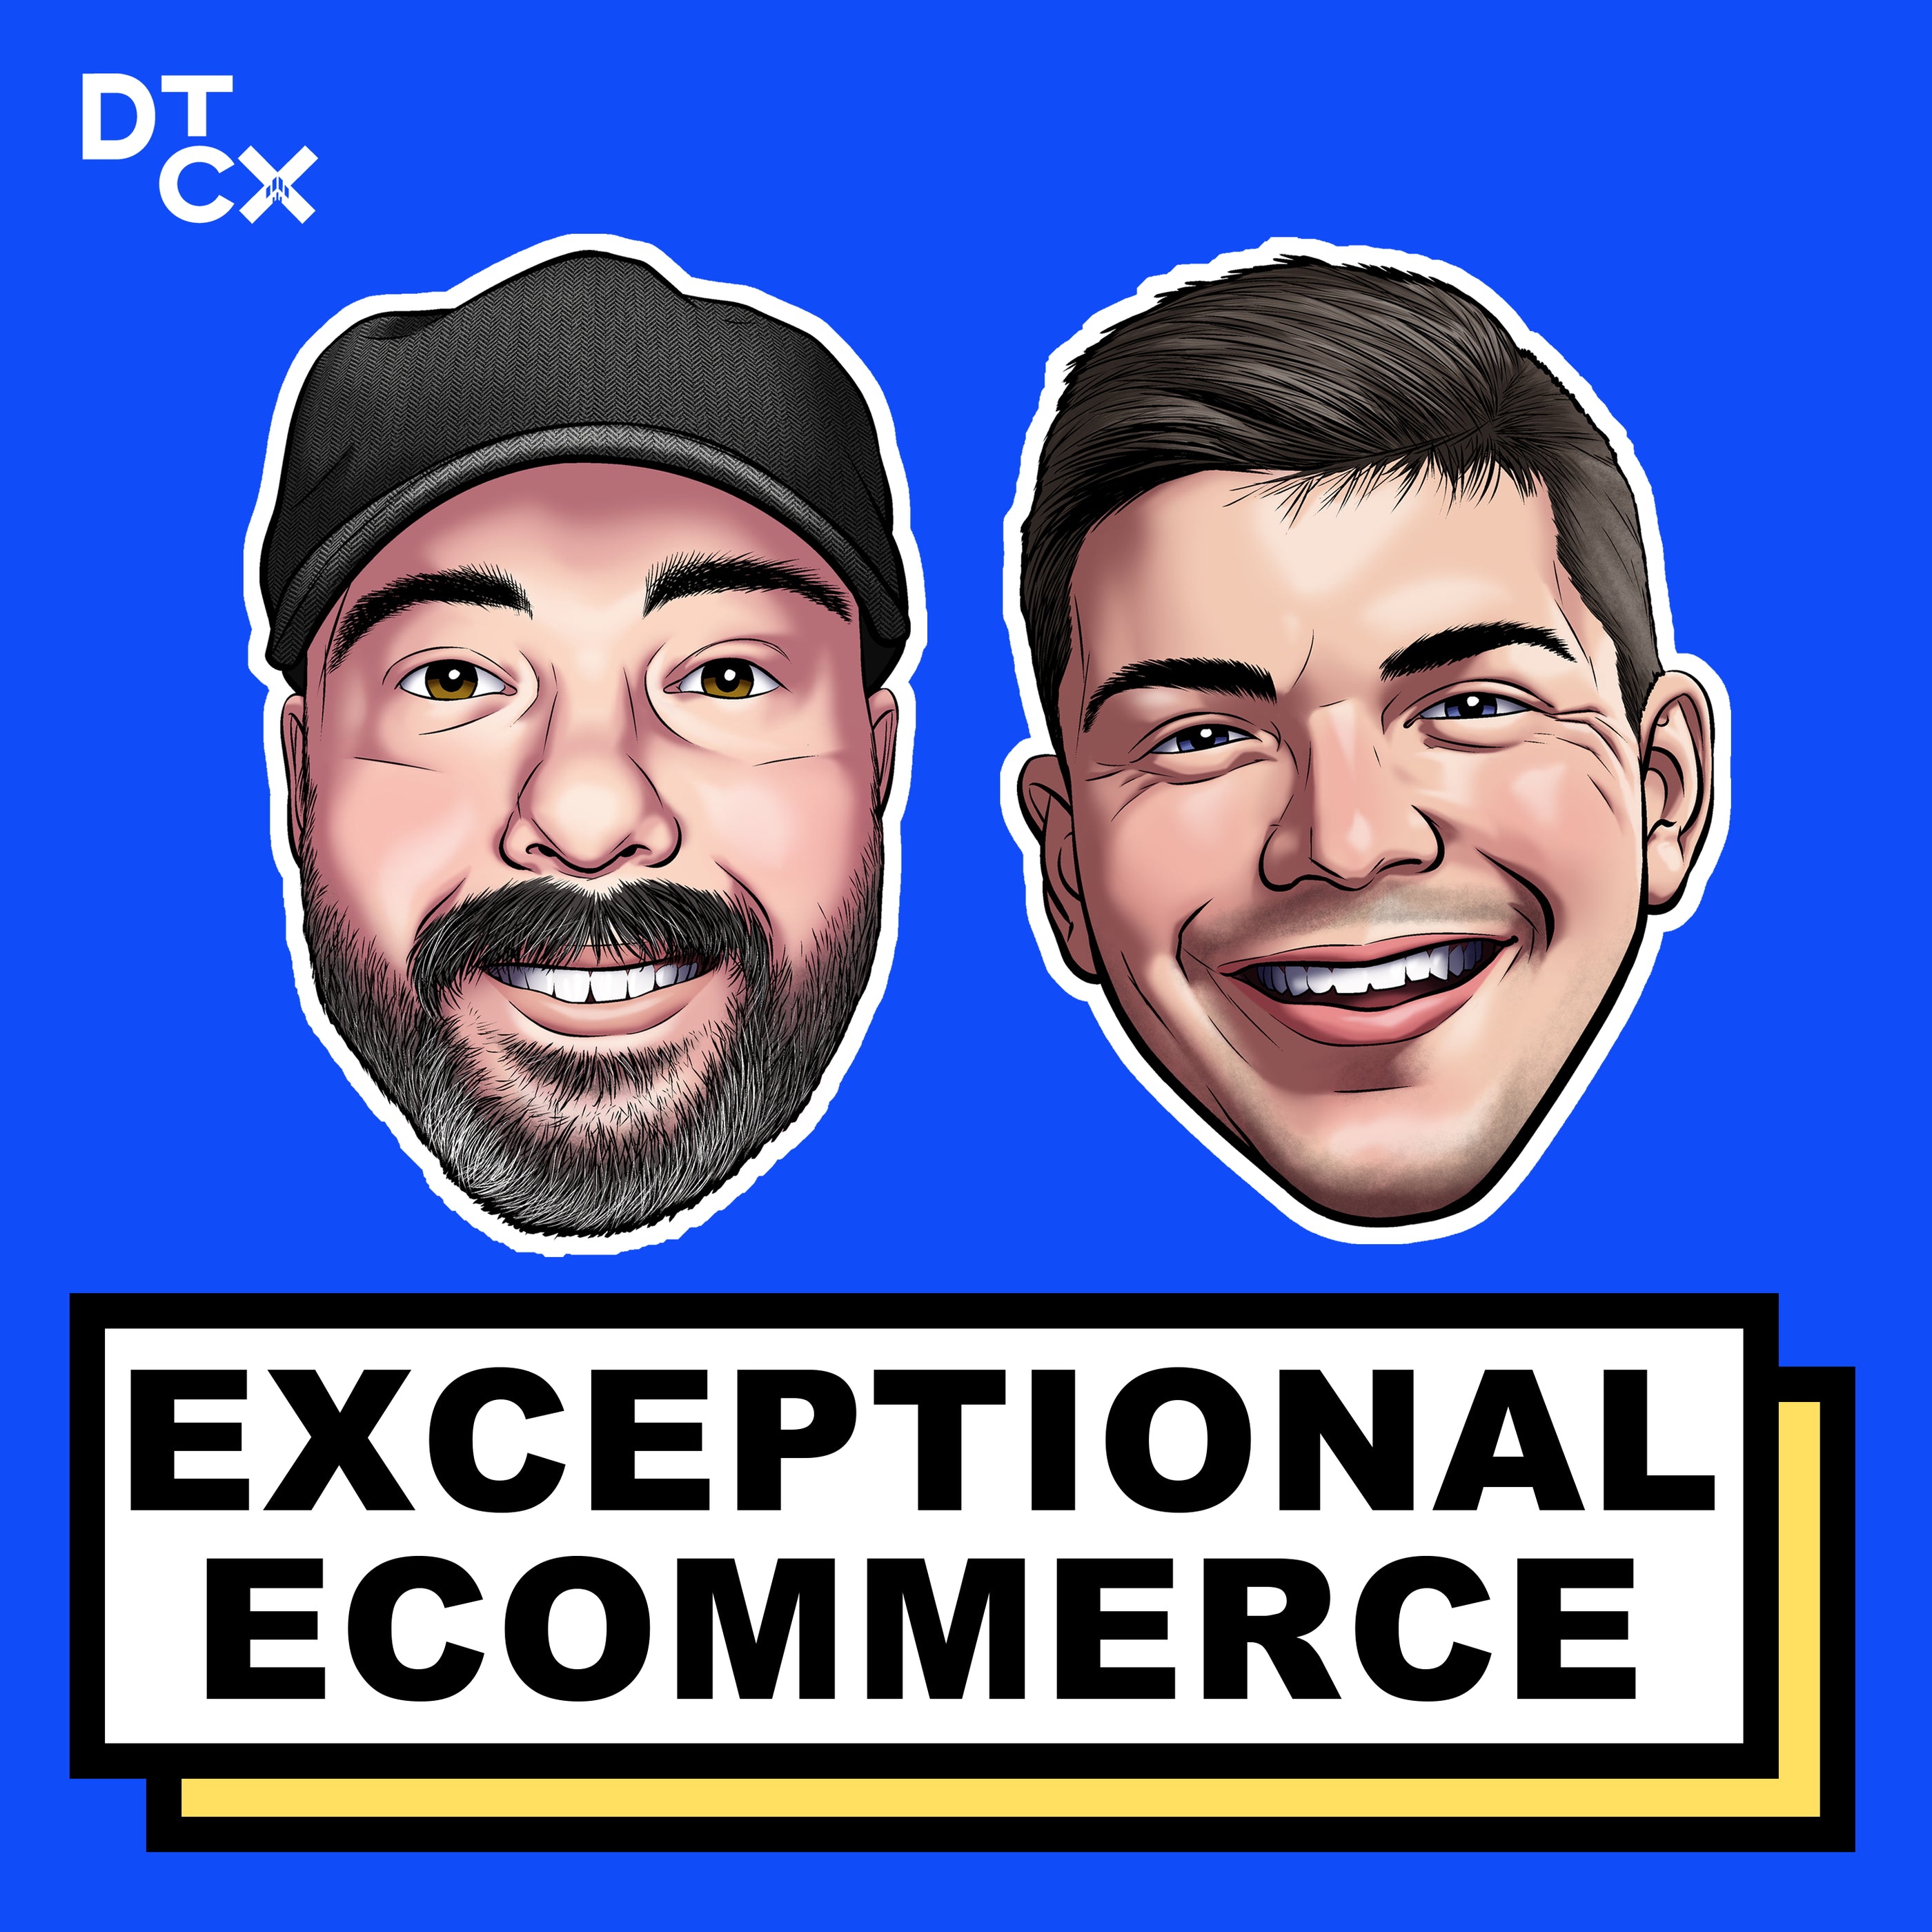 Exceptional Ecommerce | DTCX Podcast